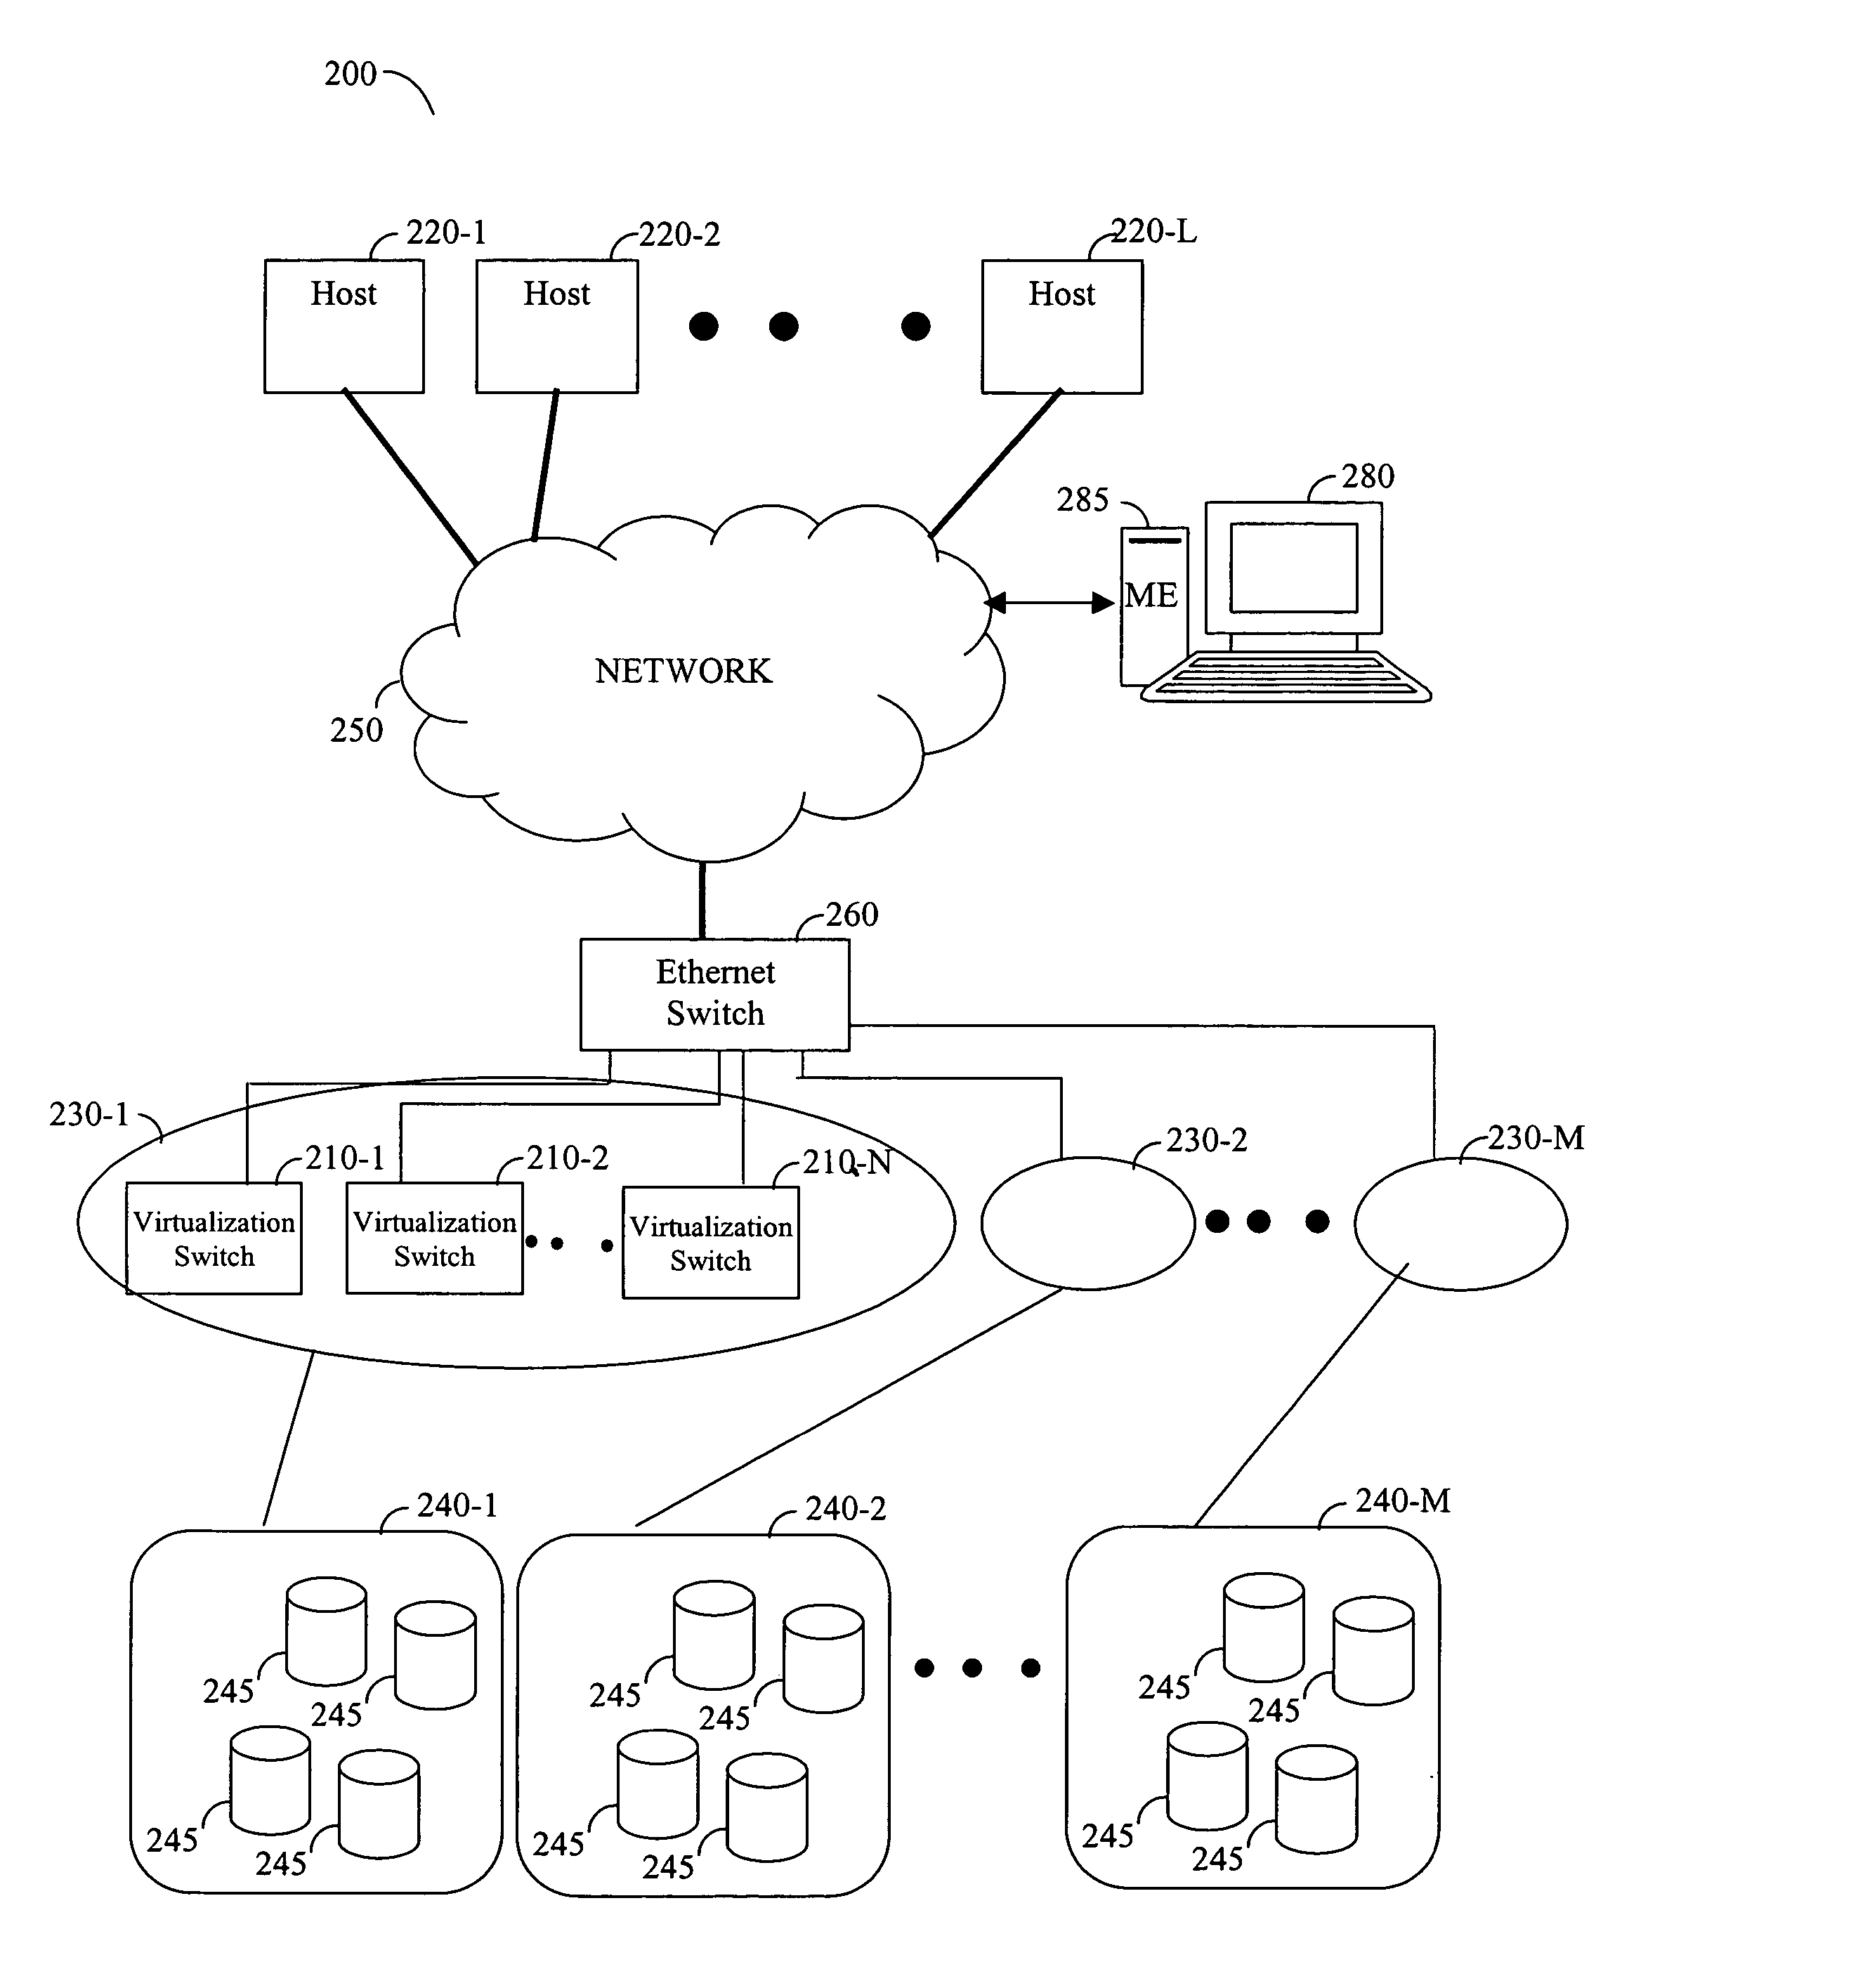 Method and graphical user interface for managing and configuring multiple clusters of virtualization switches